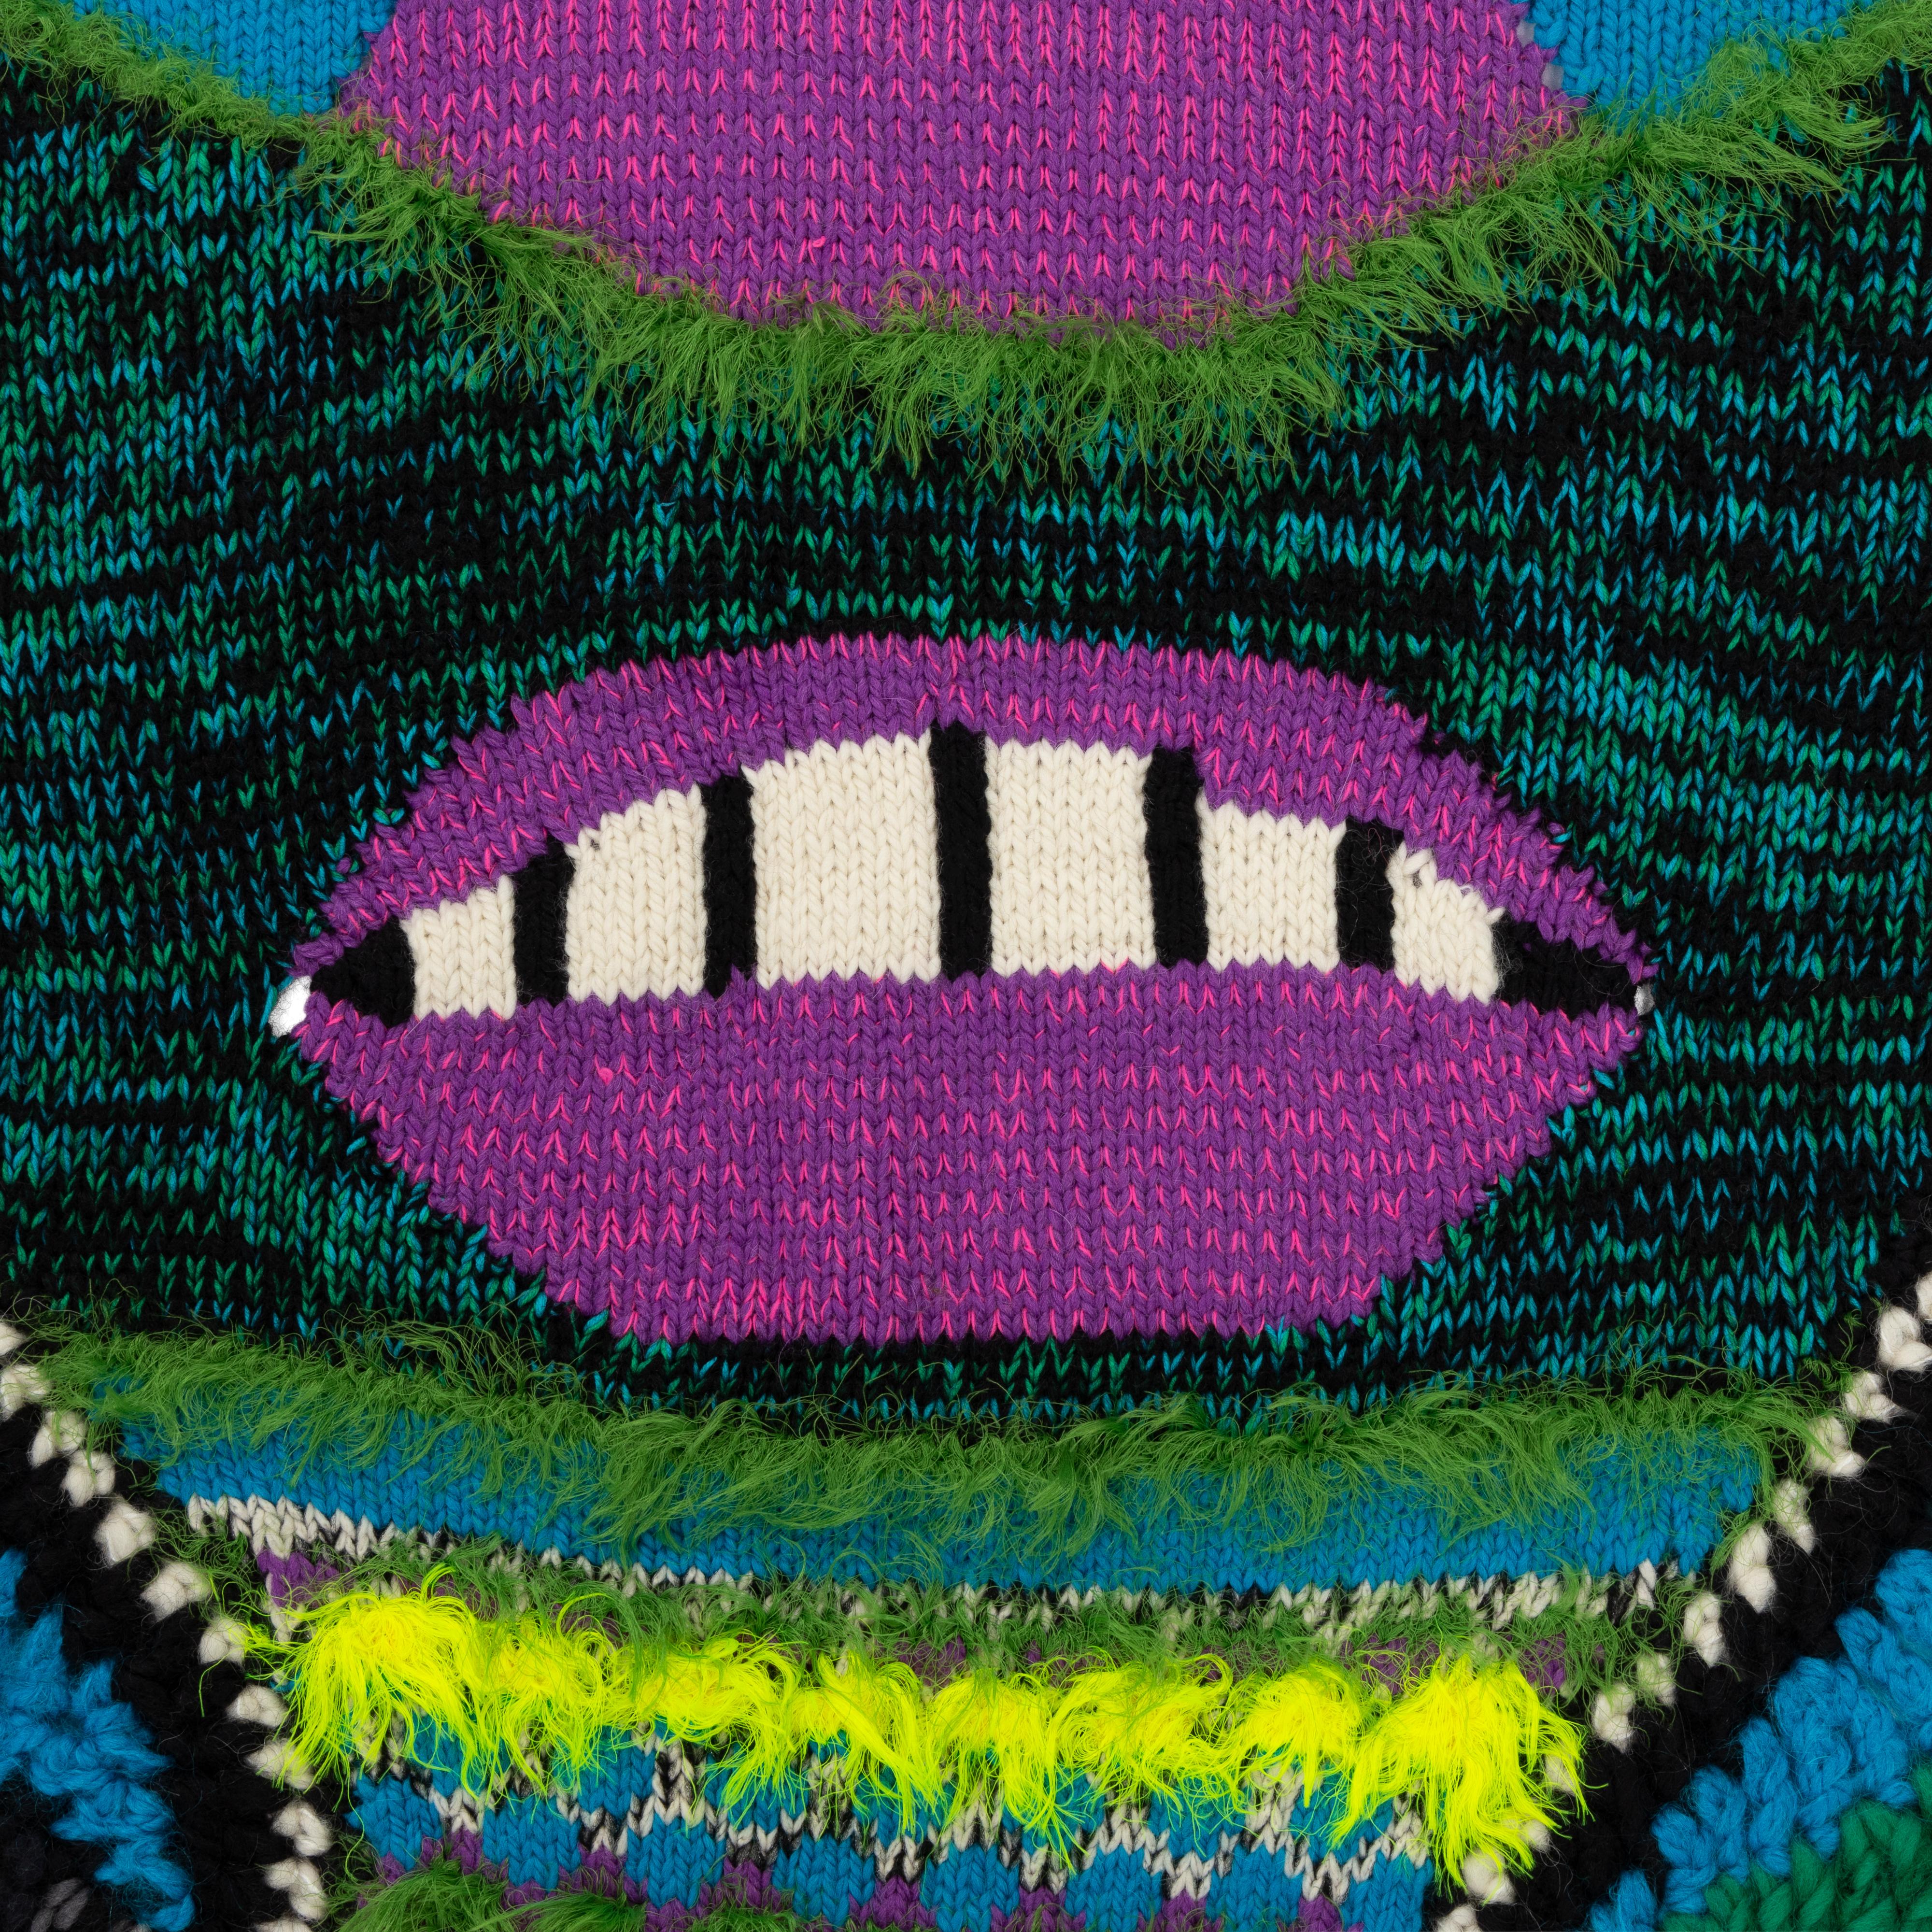 Handcrafted crochet and knit Mask Face Blanket inspired by psychedelic poster art. 
Textile Art, Hand-crafted, Knit and Crochet Art Blanket, Knitted Tapestry, Vibrant colour, Wall hanging, Throw blanket.
Knitted and crocheted pieces are